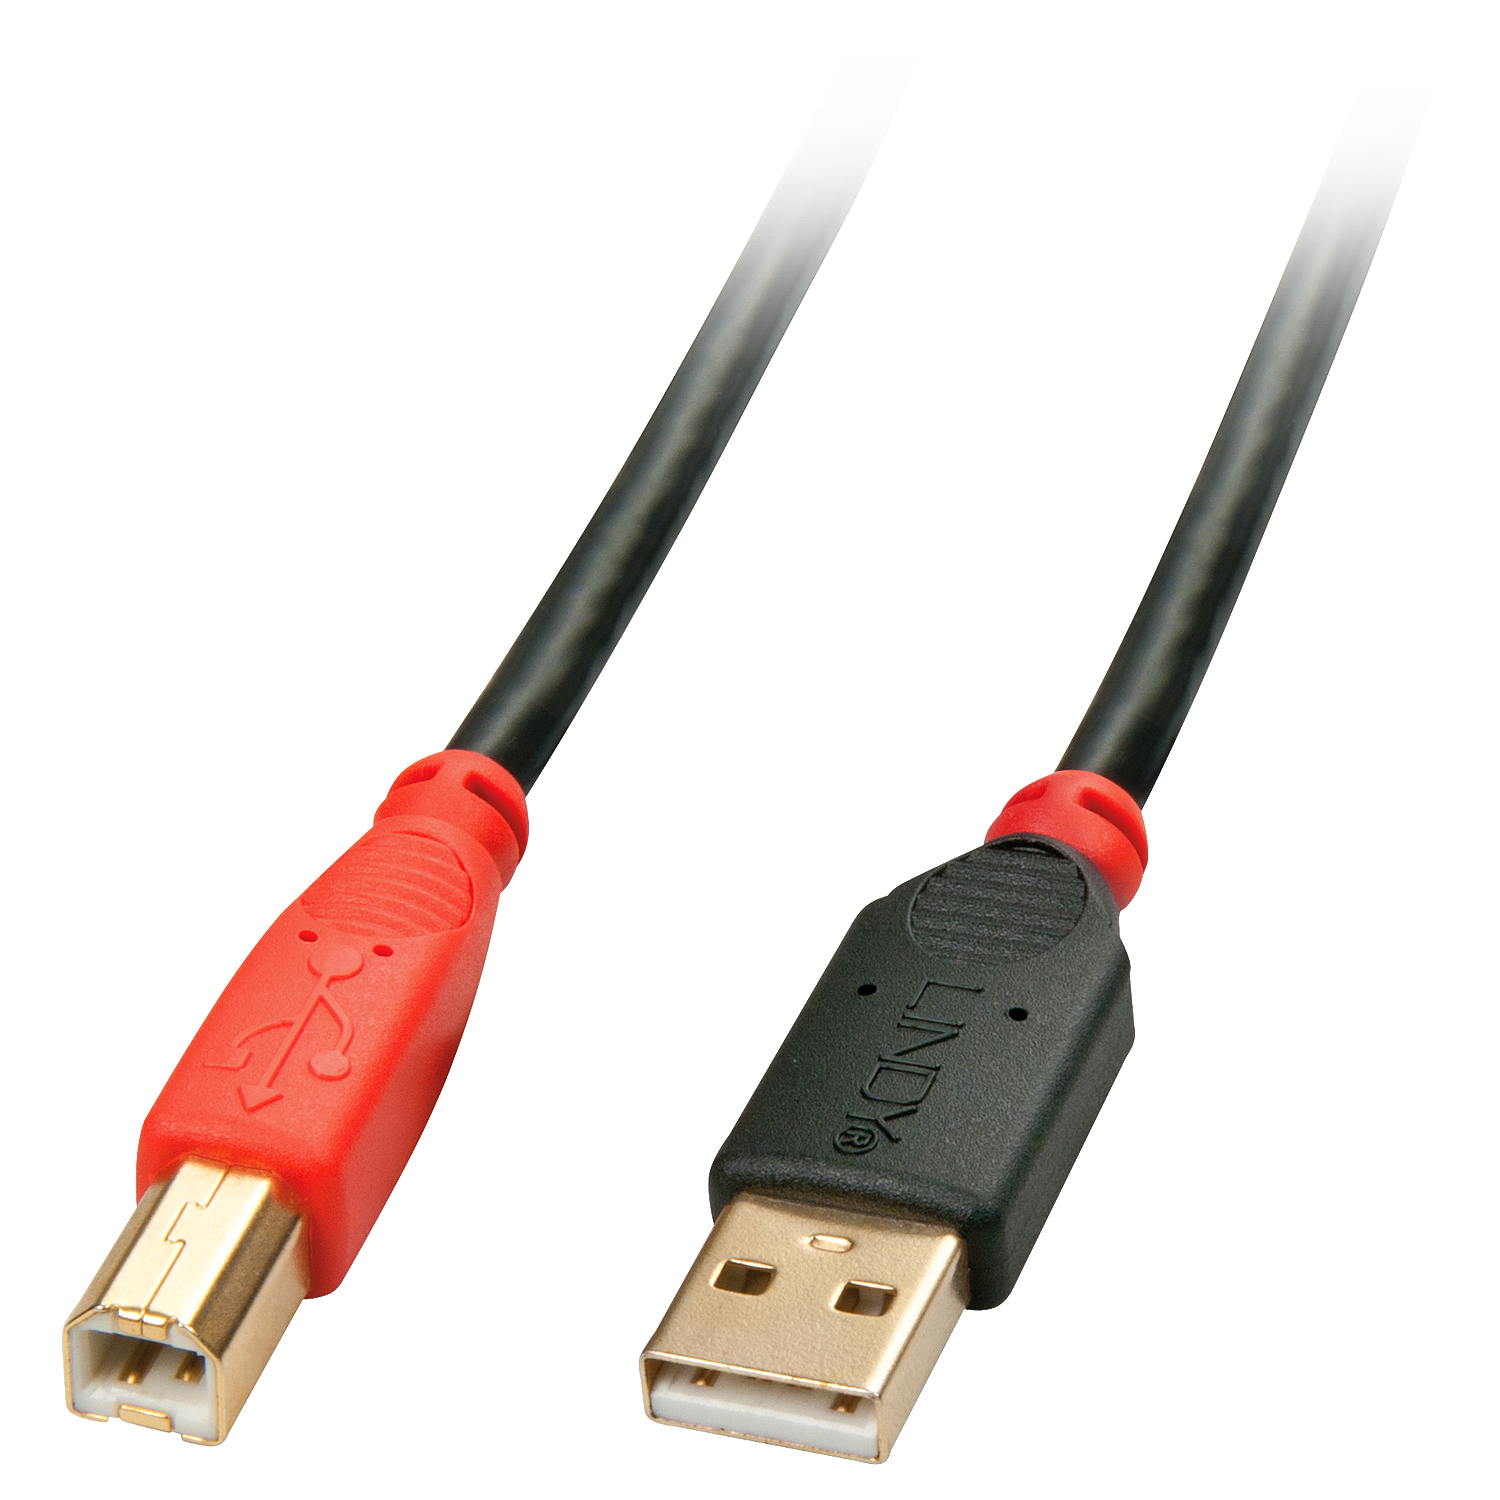 Photos - Cable (video, audio, USB) Lindy 10m USB 2.0 Type A to B Active Cable 42761 